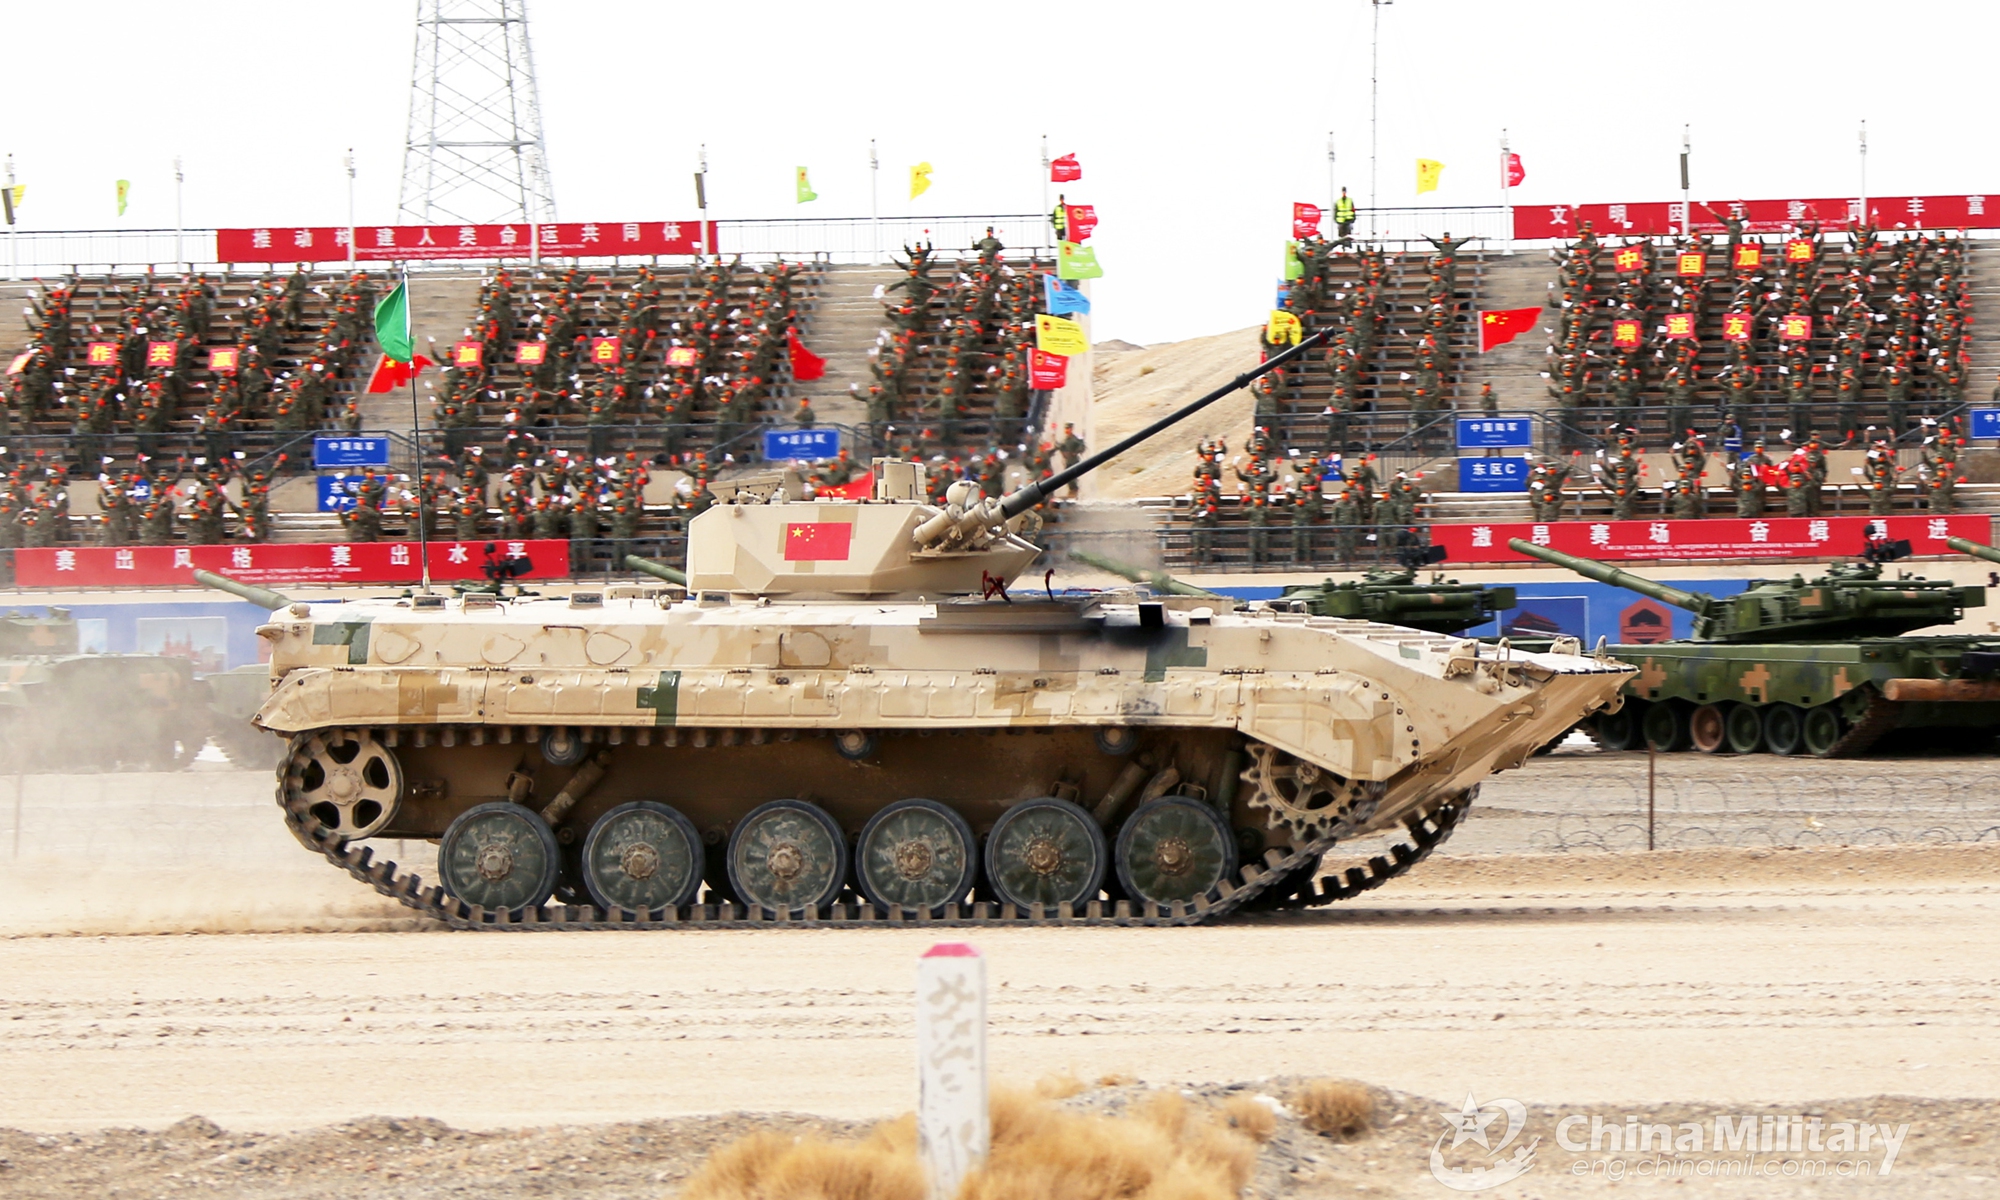 An infantry fighting vehicle of the Chinese team passes the viewing stand in the relay race, the last stage of Suvorov Onslaught contest of the International Army Games 2022 (IAG 2022) in Korla, China's Xinjiang Uygur Autonomous Region, on August 21, 2022.Photo:eng.chinamil.com.cn